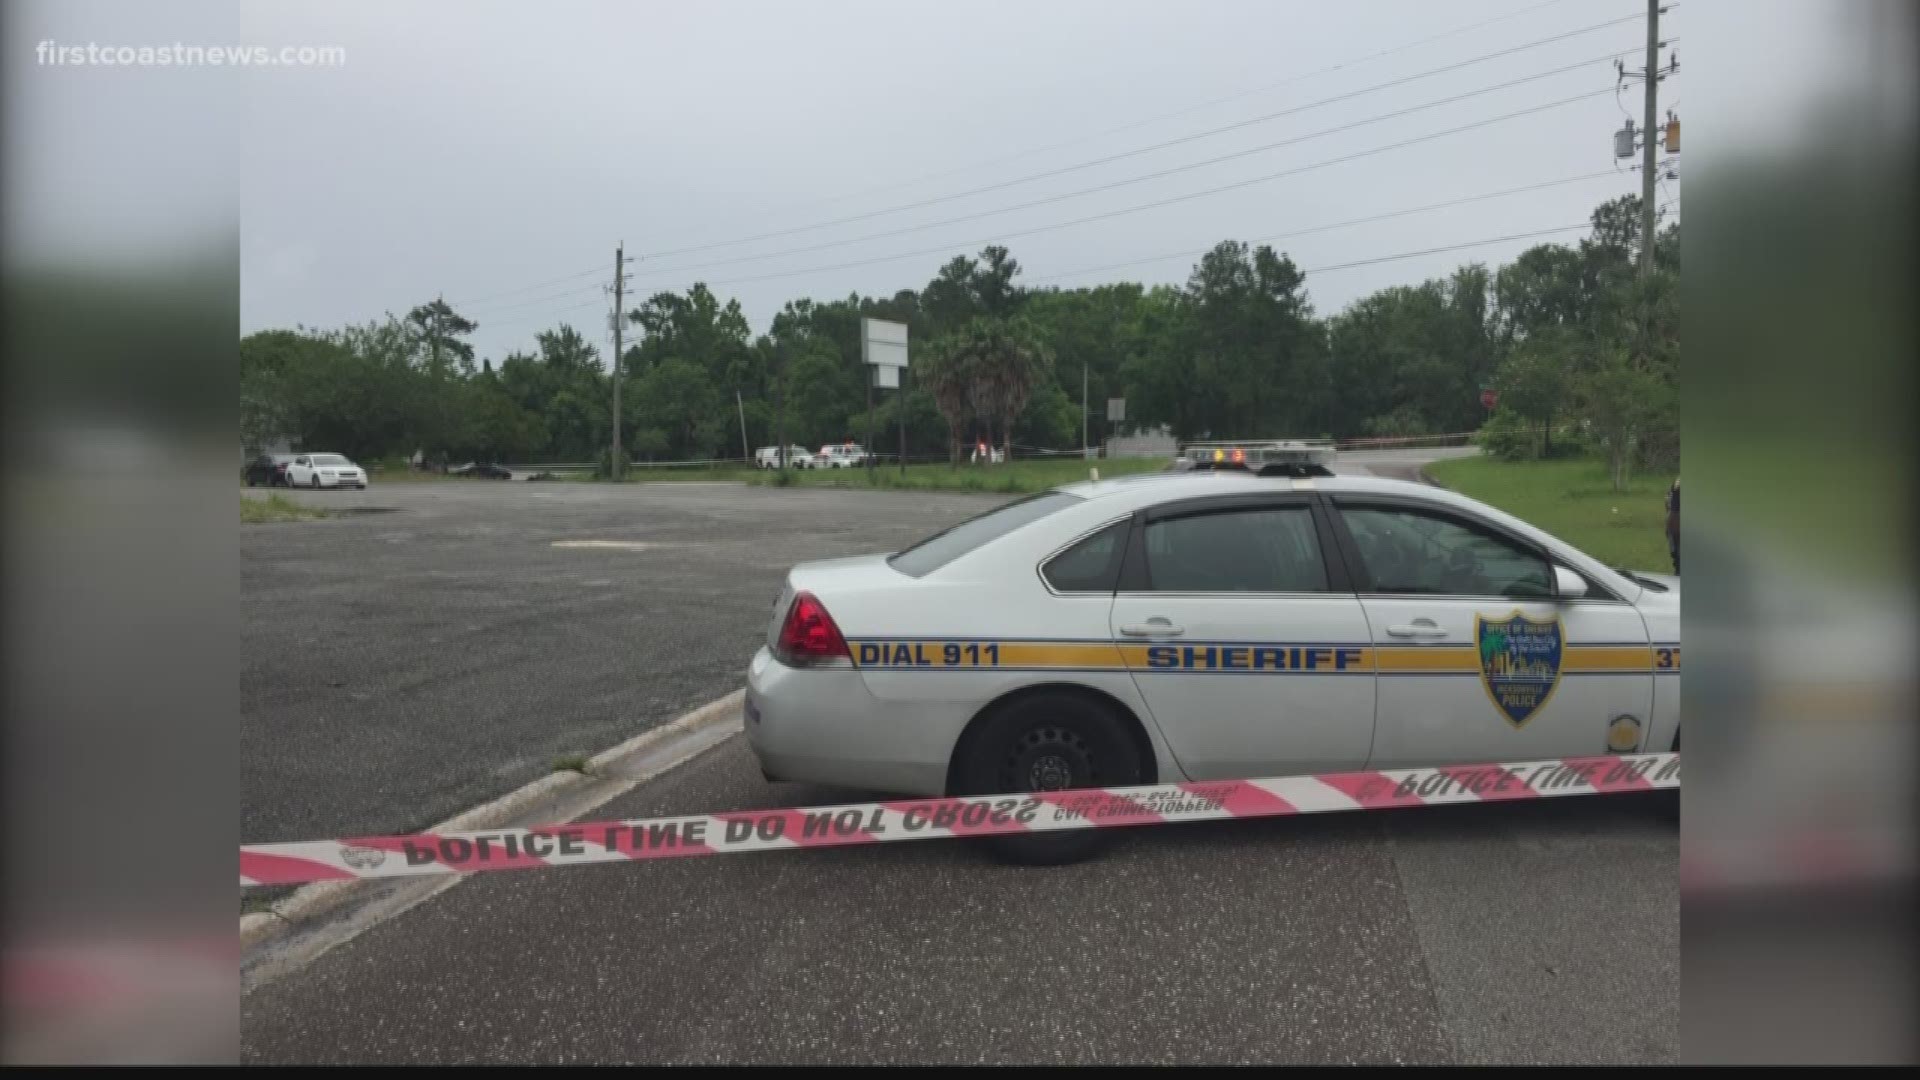 The Jacksonville Sheriff's Office confirmed a man has died in a shooting in Moncrief on Sunday. Lana Harris has the details.